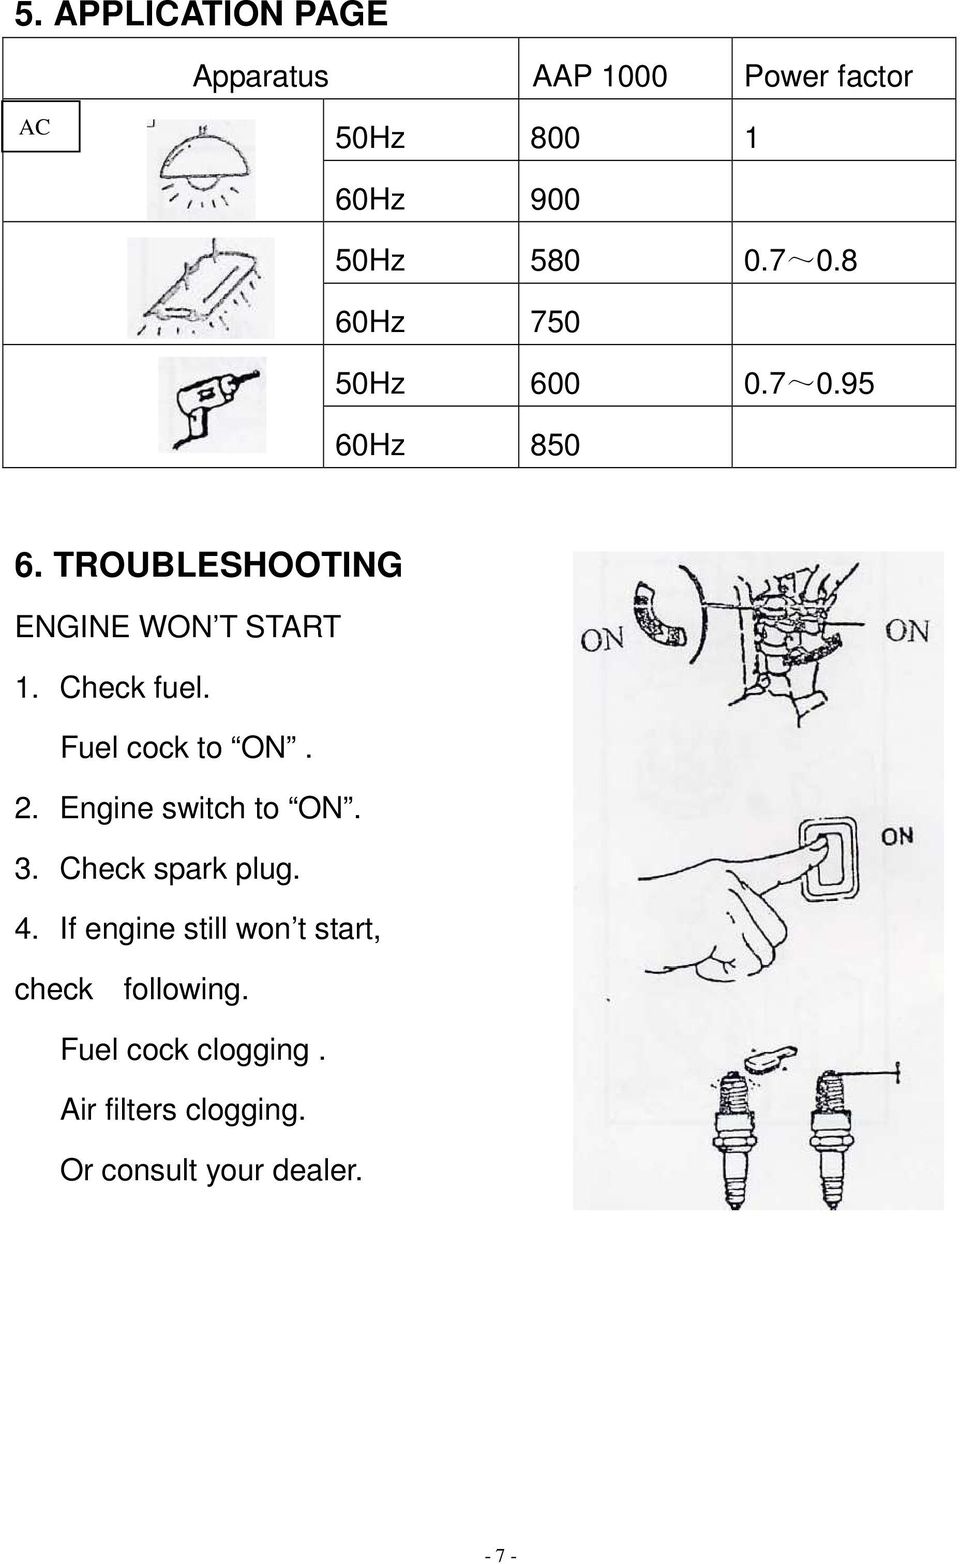 Fuel cock to ON. 2. Engine switch to ON. 3. Check spark plug. 4.